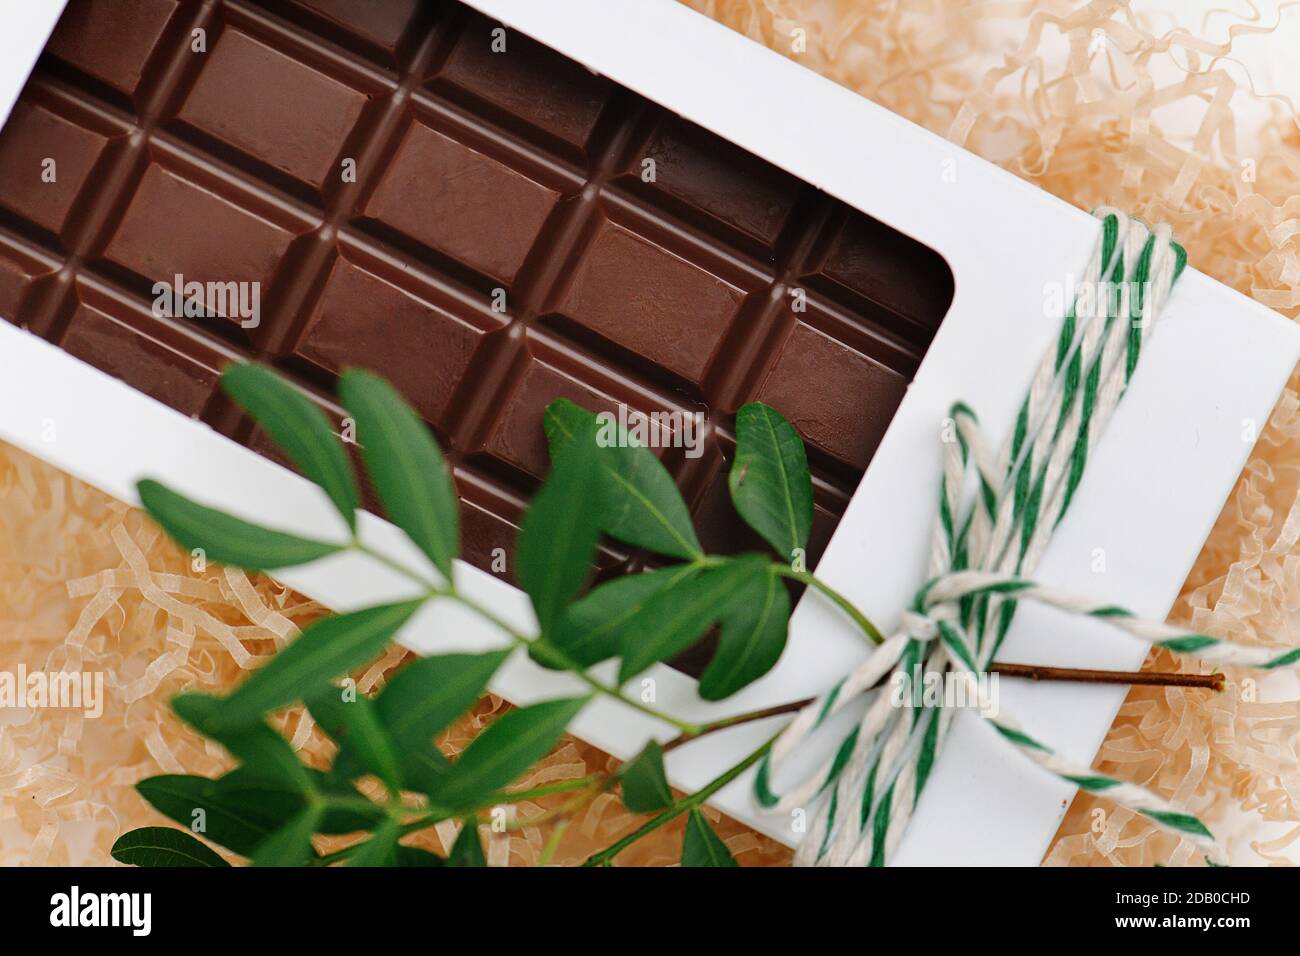 Chocolate bar in a white windowed box, tied with a rope. Plant branch attached. Stock Photo